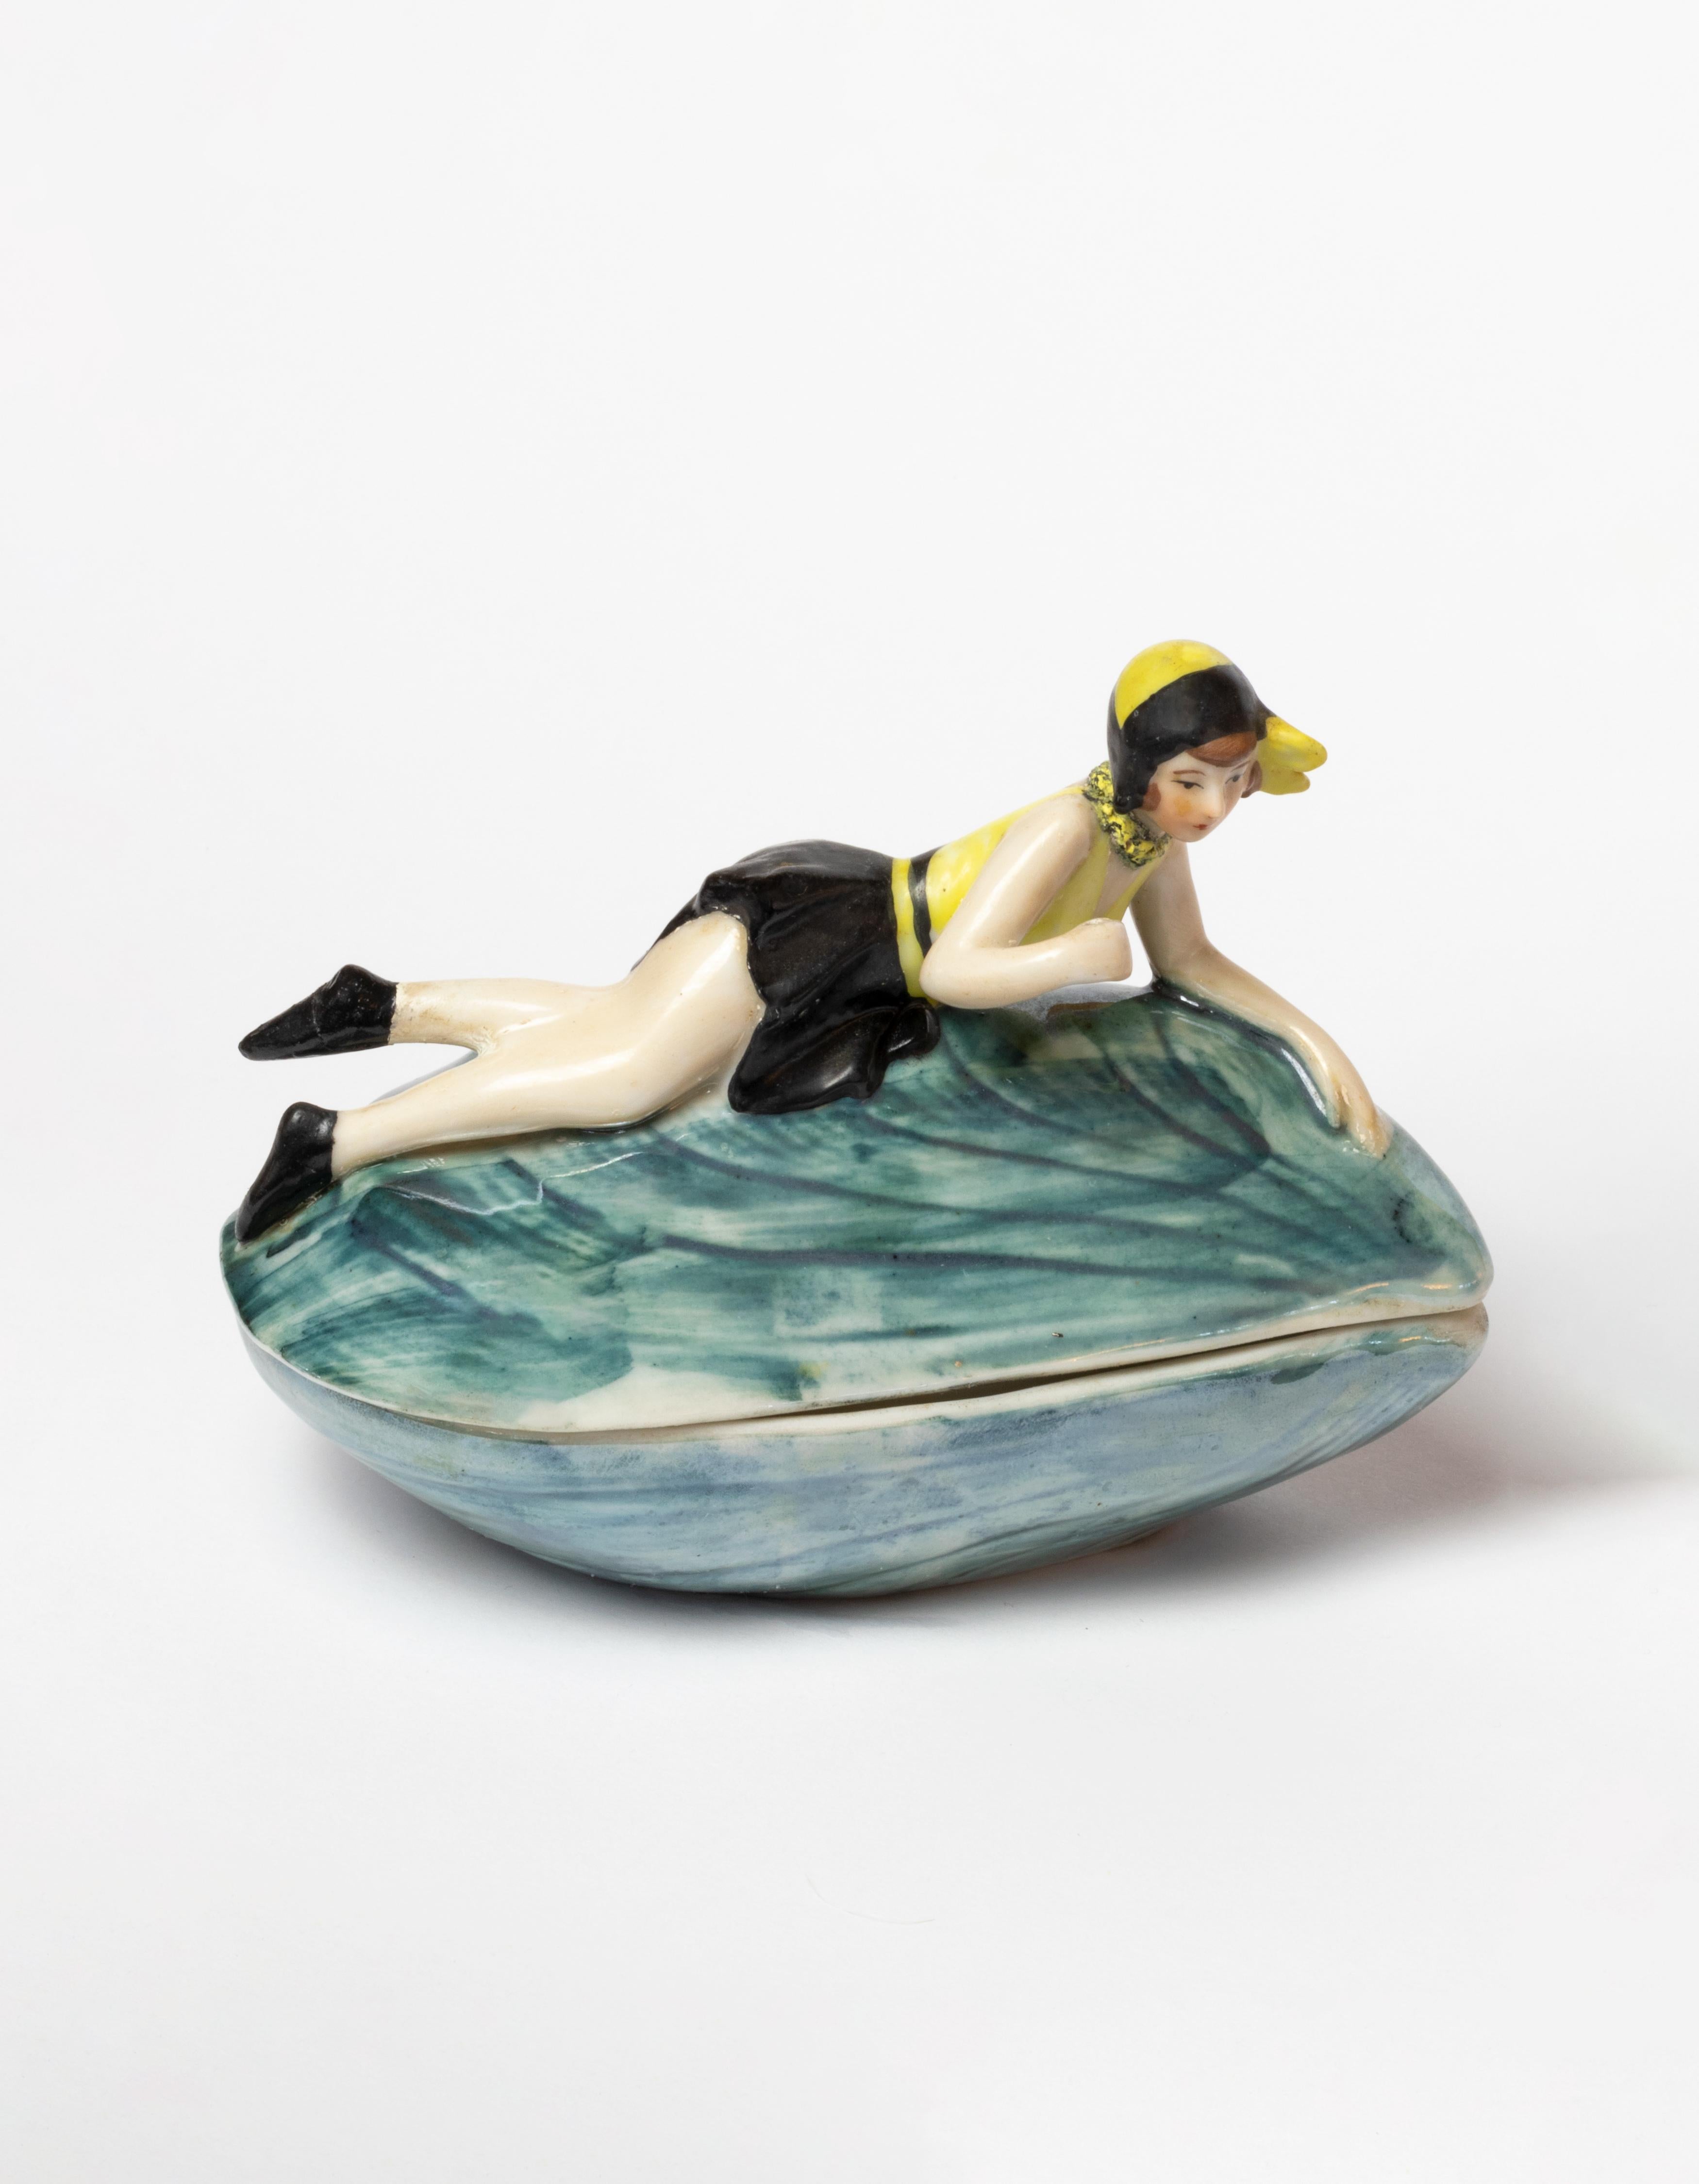 Art Deco Mussel Shell Rice Powder Box Pin Up Woman Porcelain by Goebel, 1929 For Sale